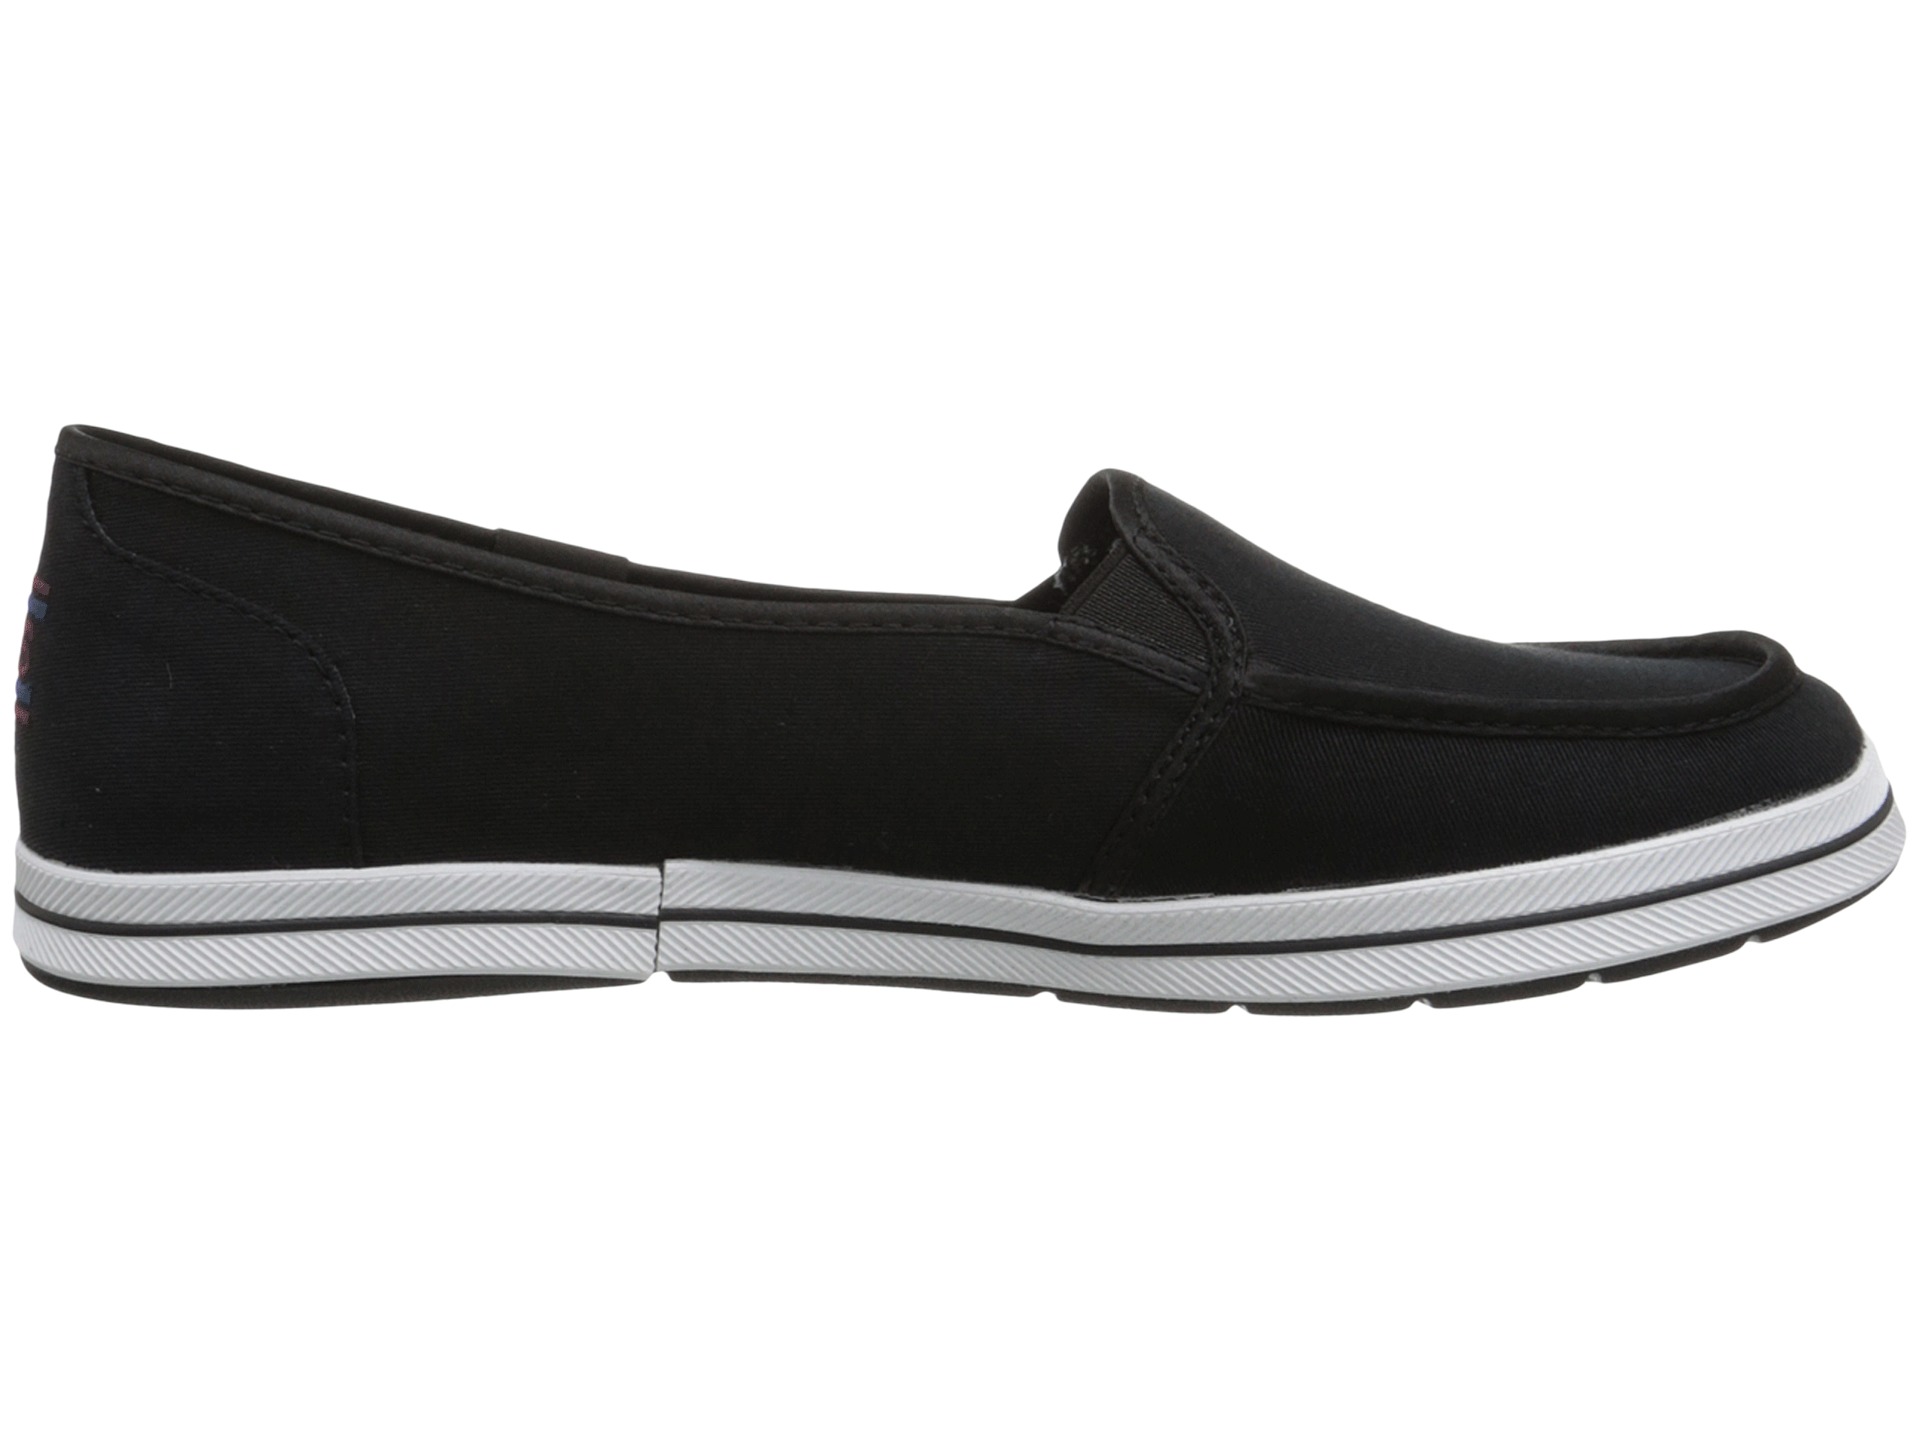 BOBS from SKECHERS Bobs Flexy Black - Zappos.com Free Shipping BOTH Ways